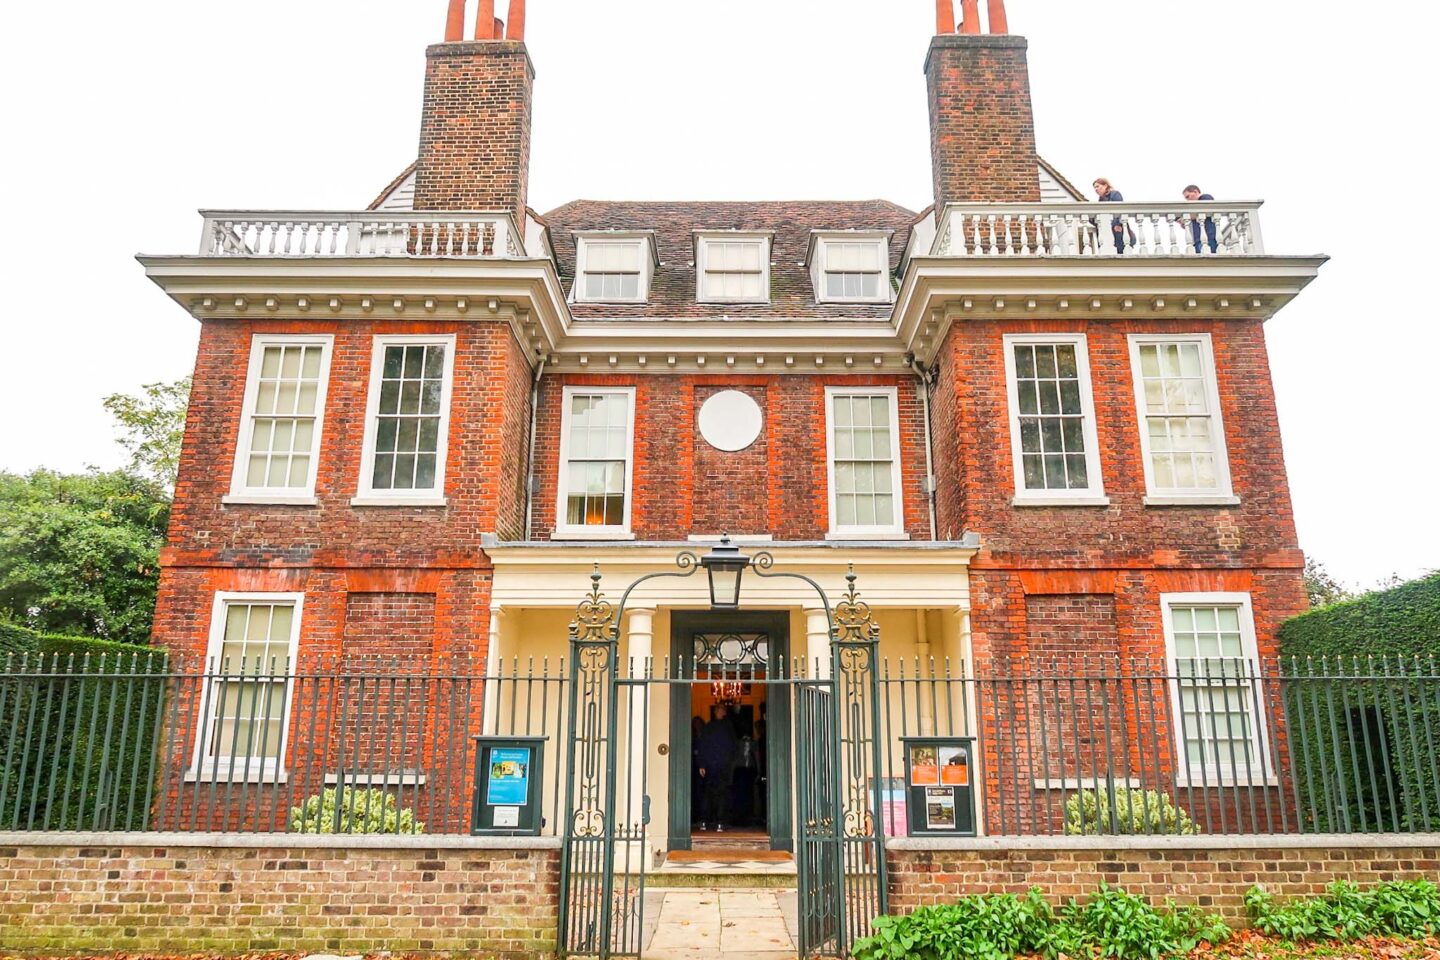 Things to do in Hampstead, Fenton House Museum from front